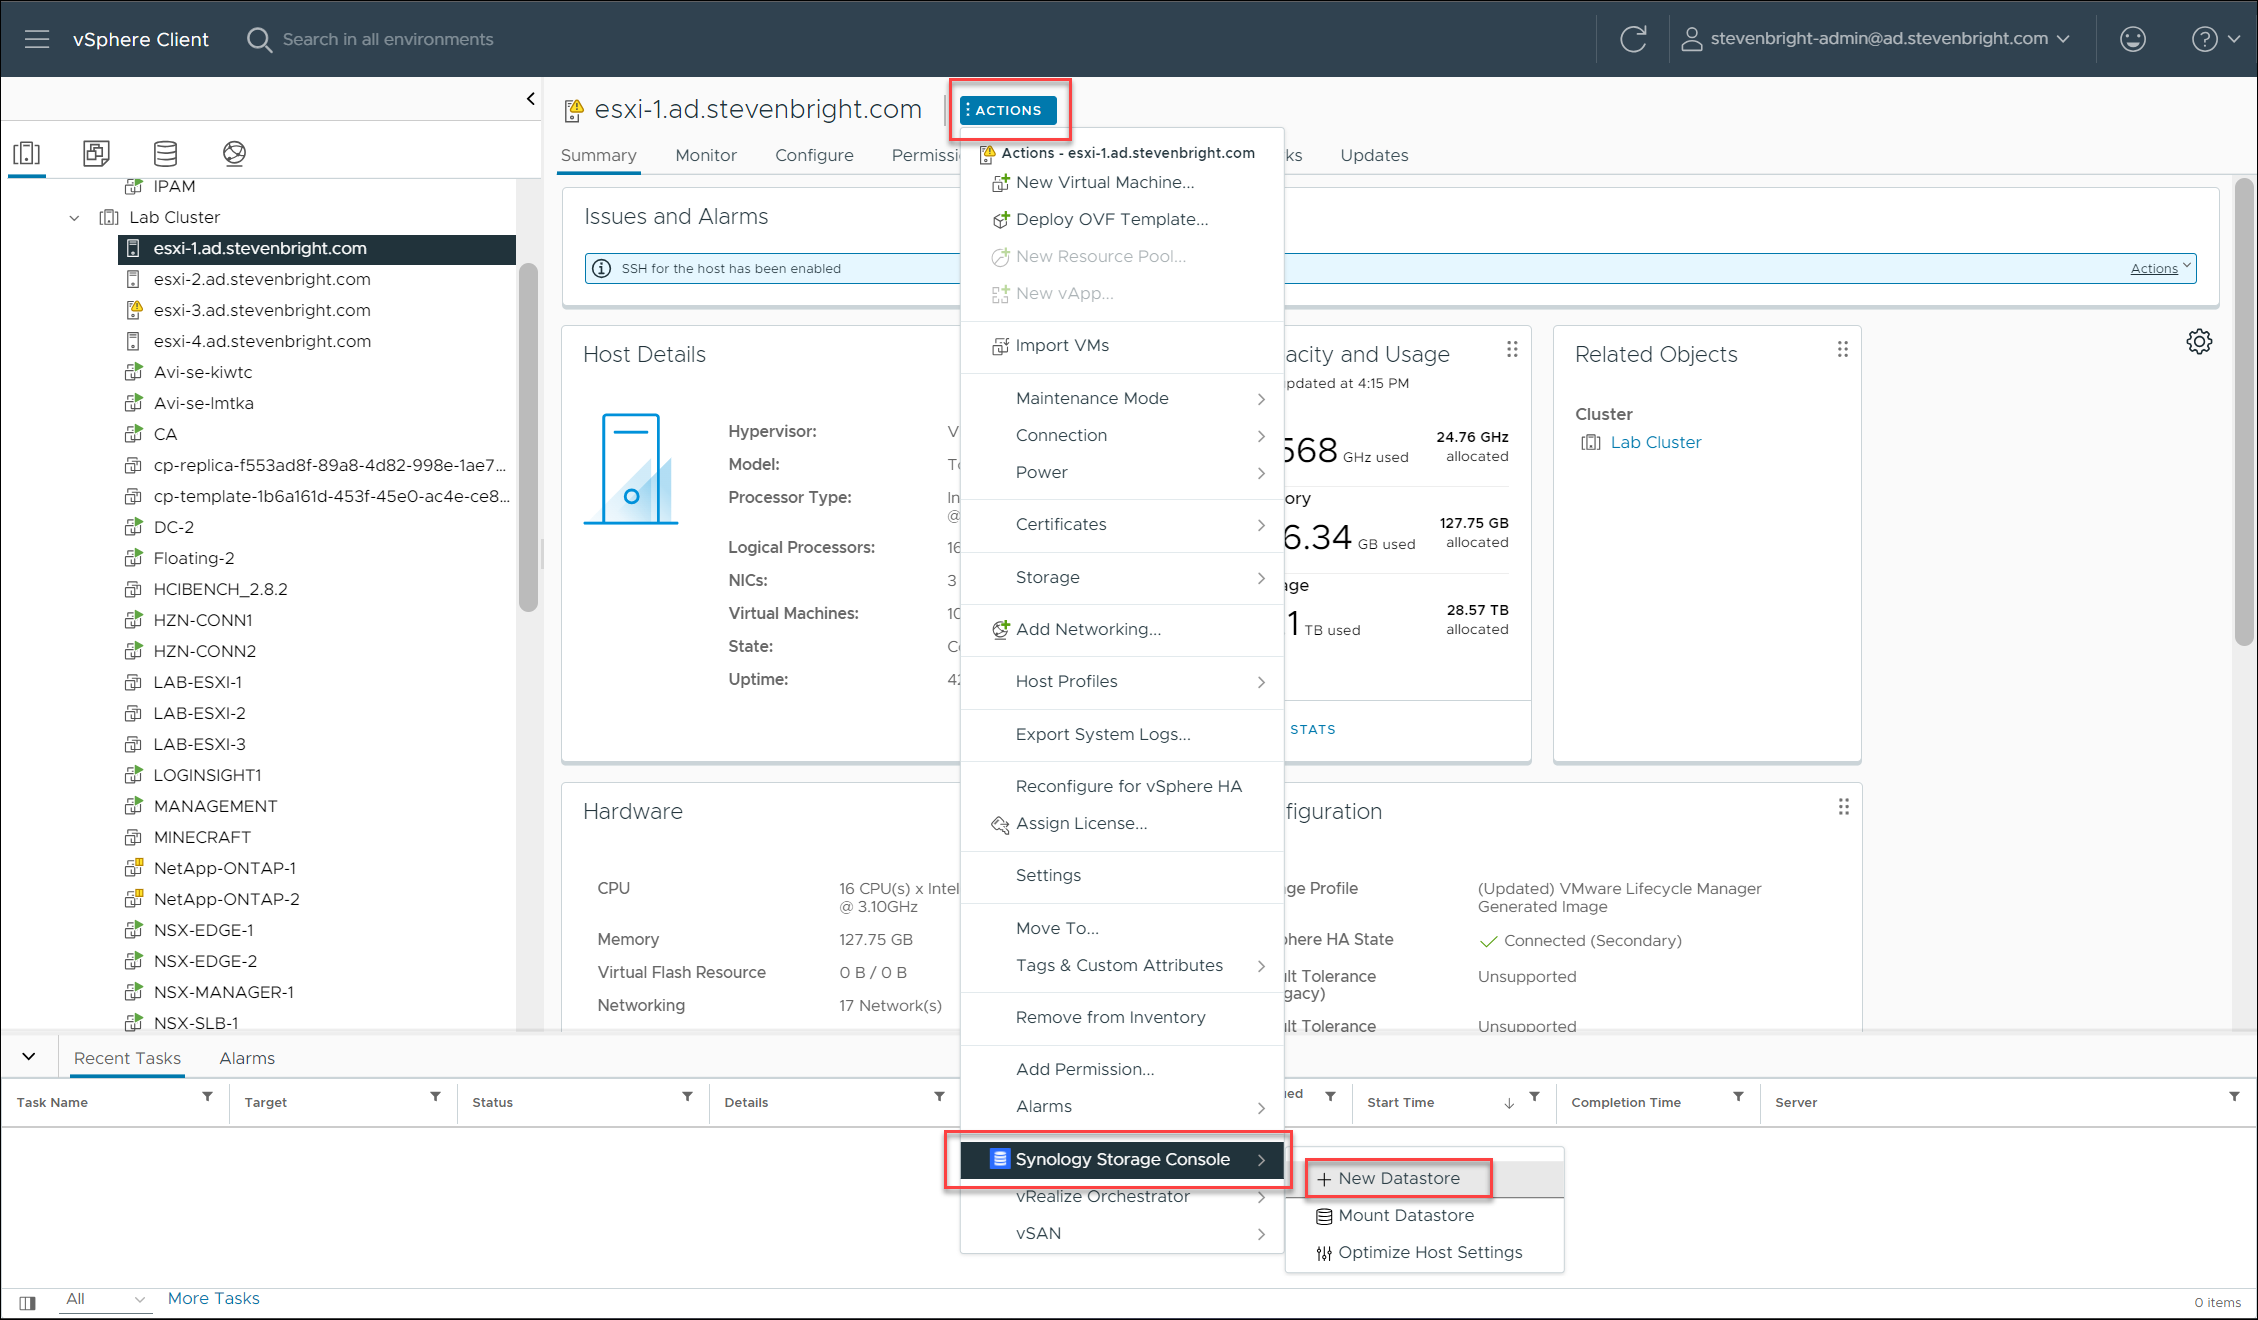 VMware vSphere Client - Accessing the Synology Storage Console New Datastore Option